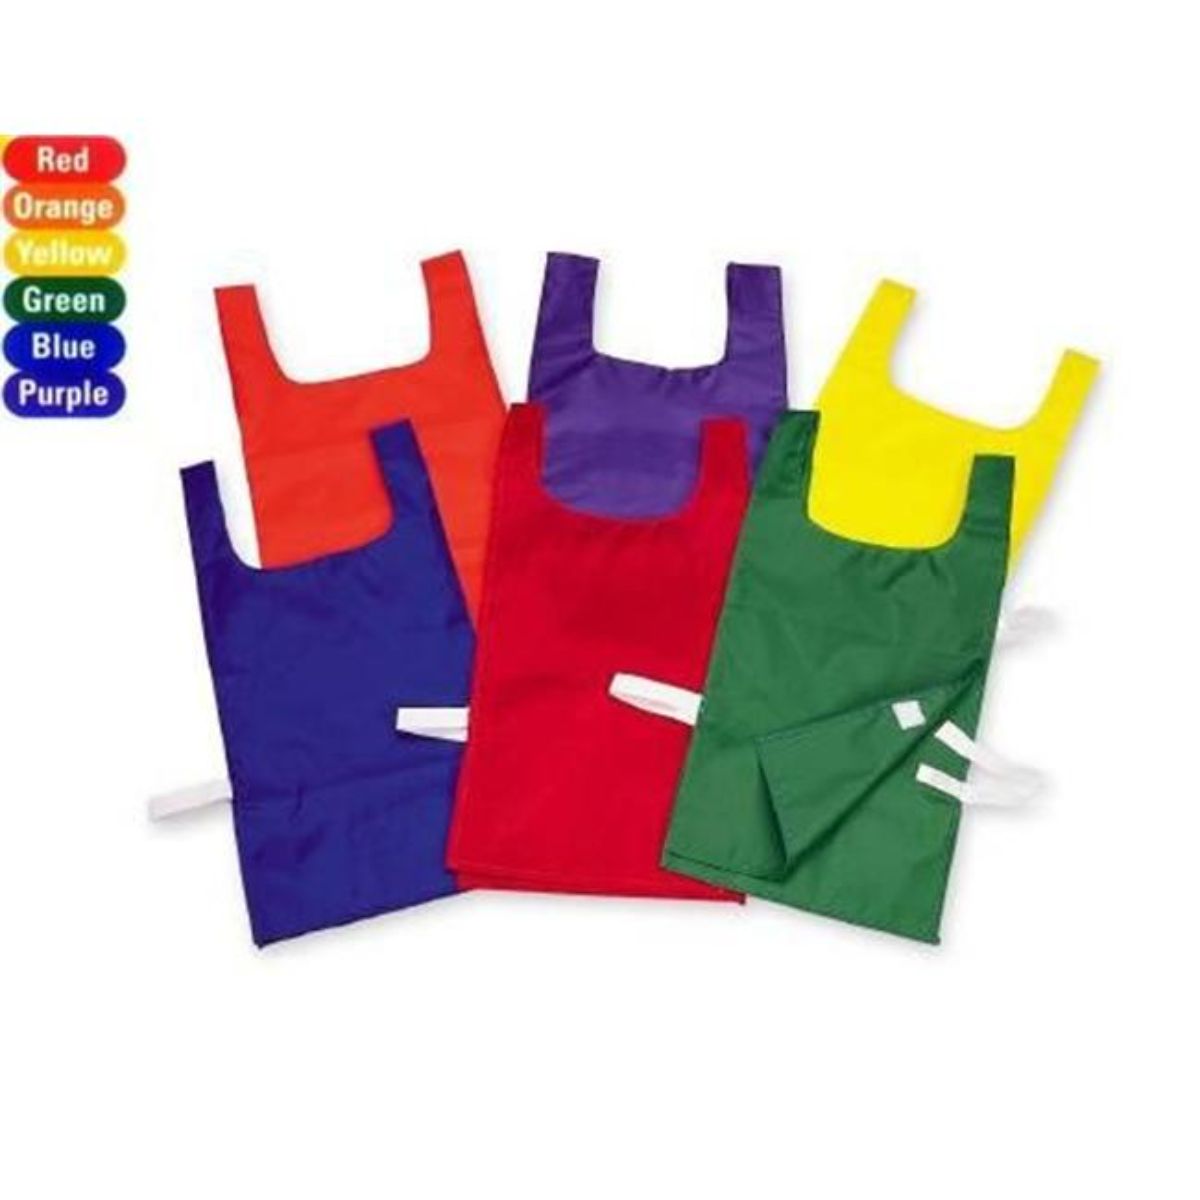 Picture of Everrich EVC-0081 21 x 11 Inch Pinnies with Cloth Tie Closure - Set of 6